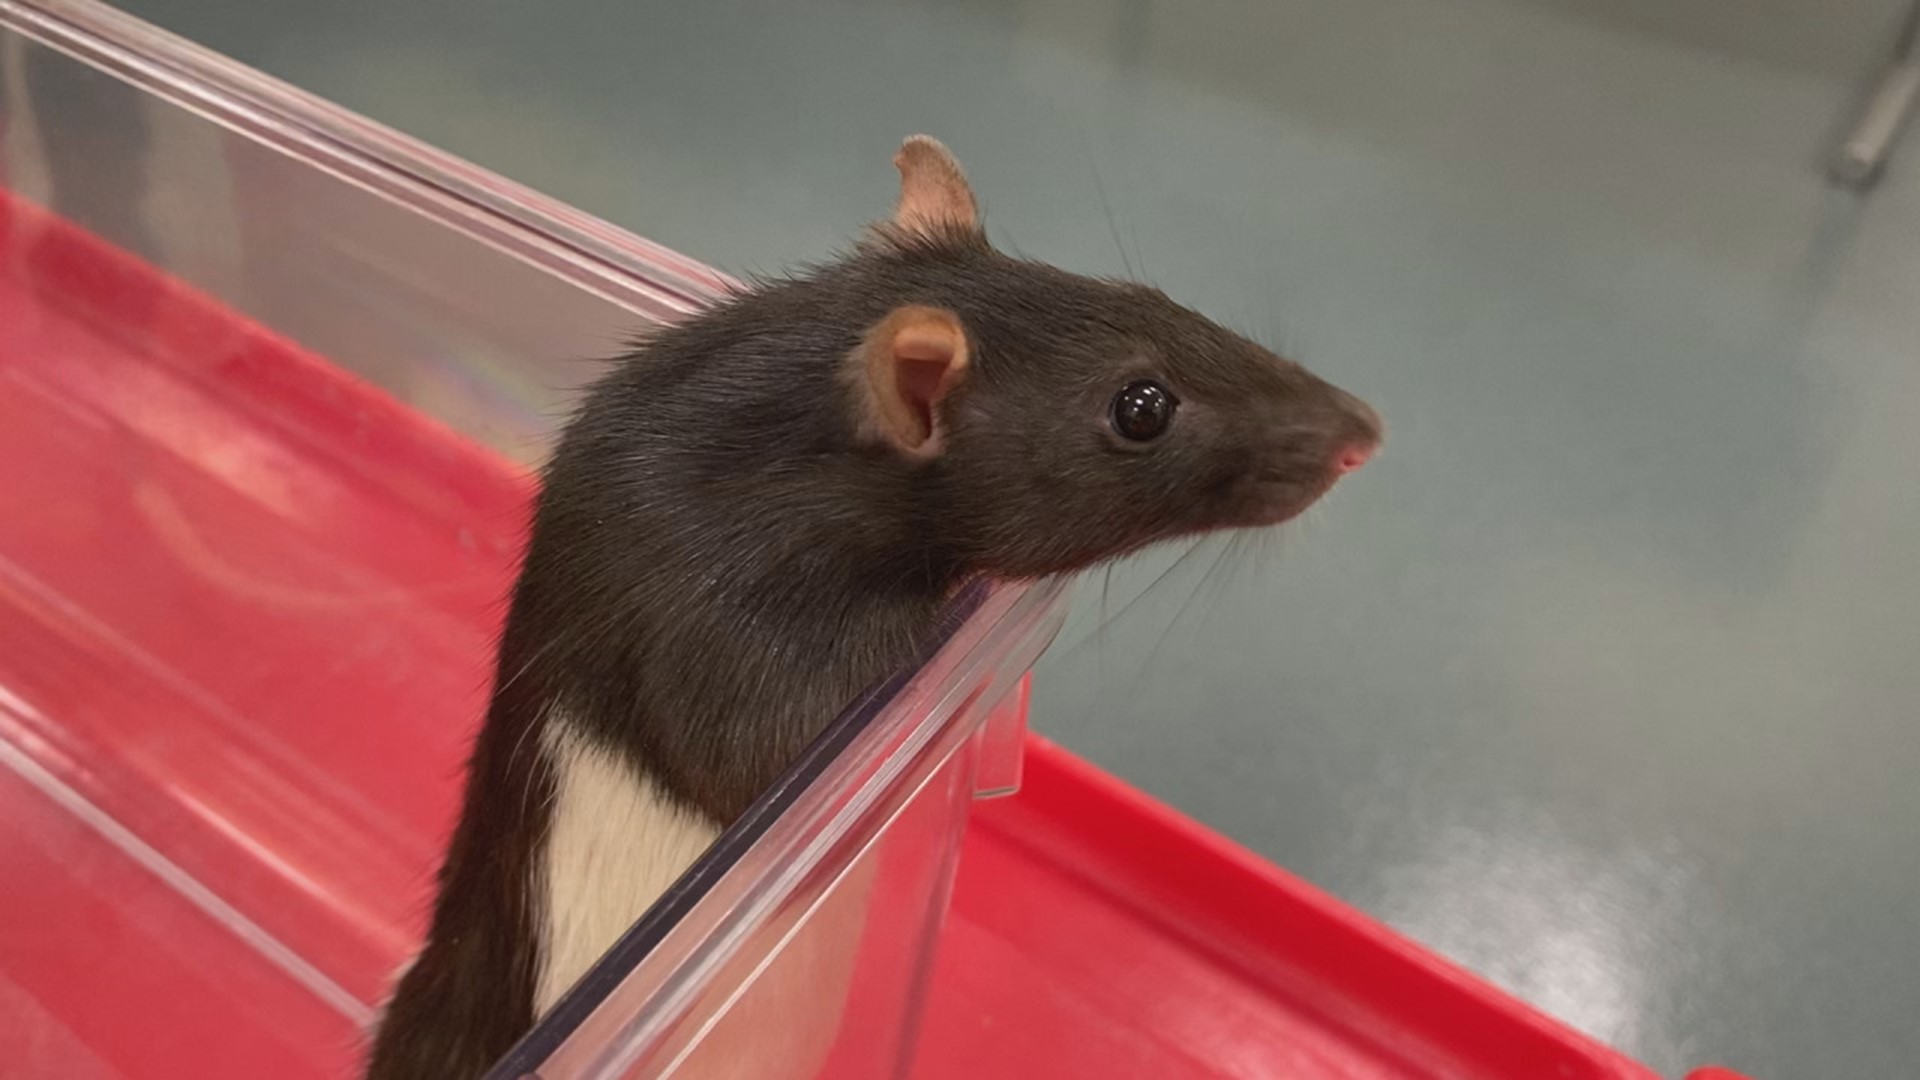 More than 10 lab rats from Millersville University are available for adoption after their participation in a research study class.